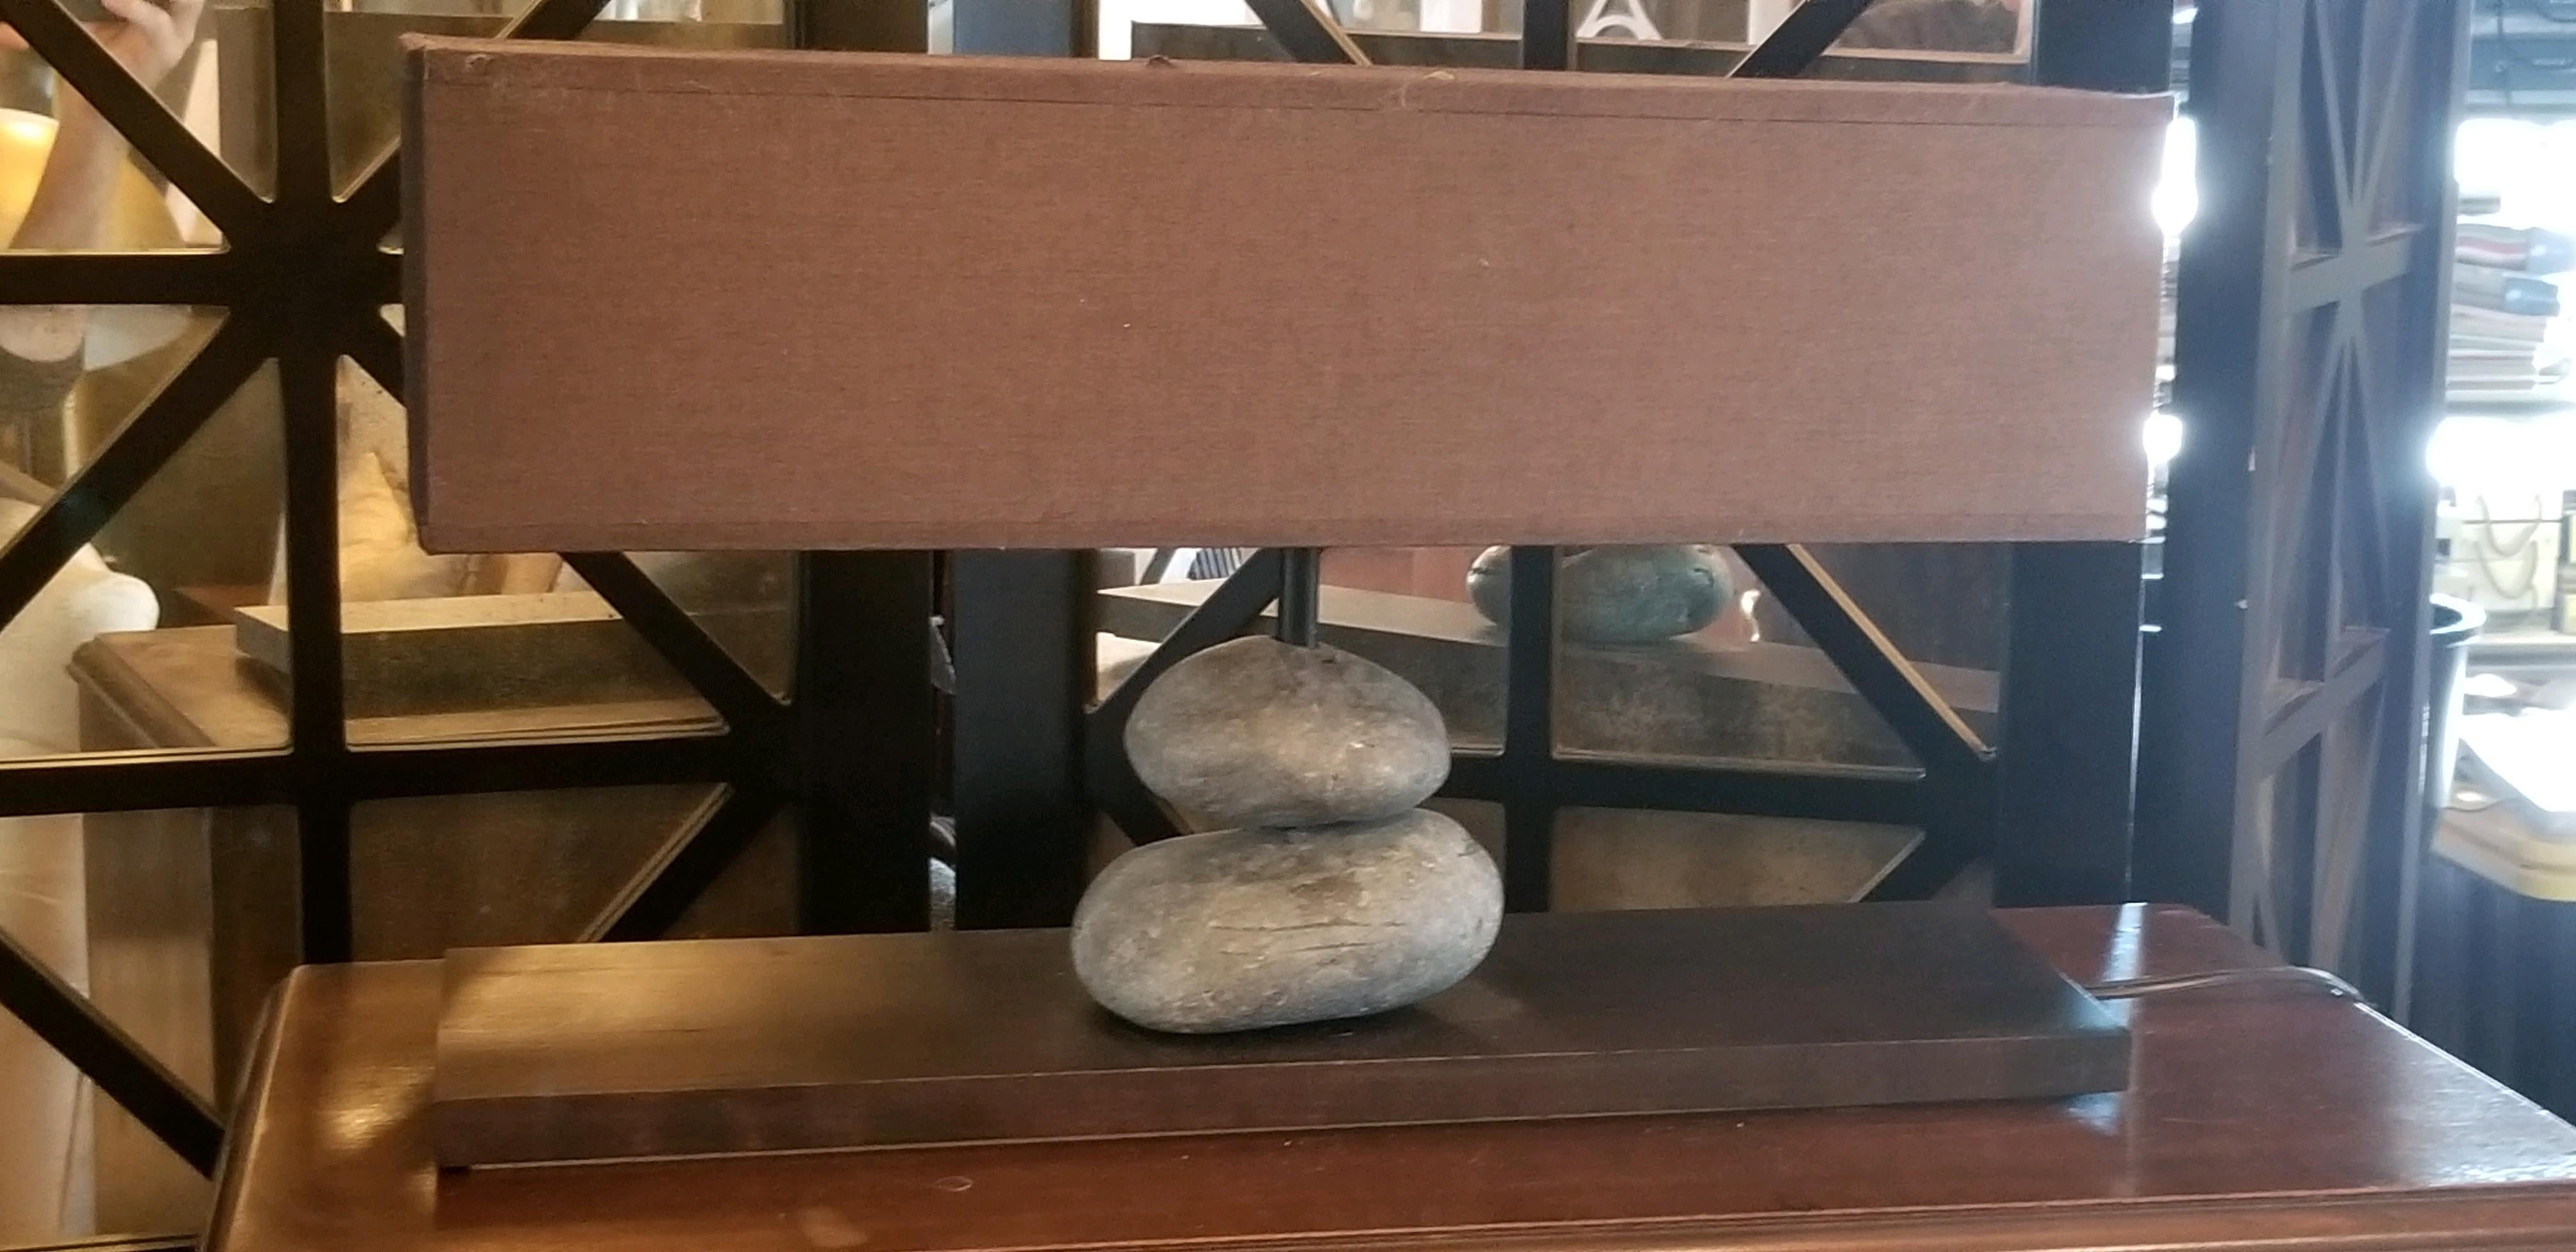 Lovely French rock lamp from contemporary French Company. We sold a series of these and they remain popular for the unexpected element in any room. Hand cut shade and hand drilled stone elements.